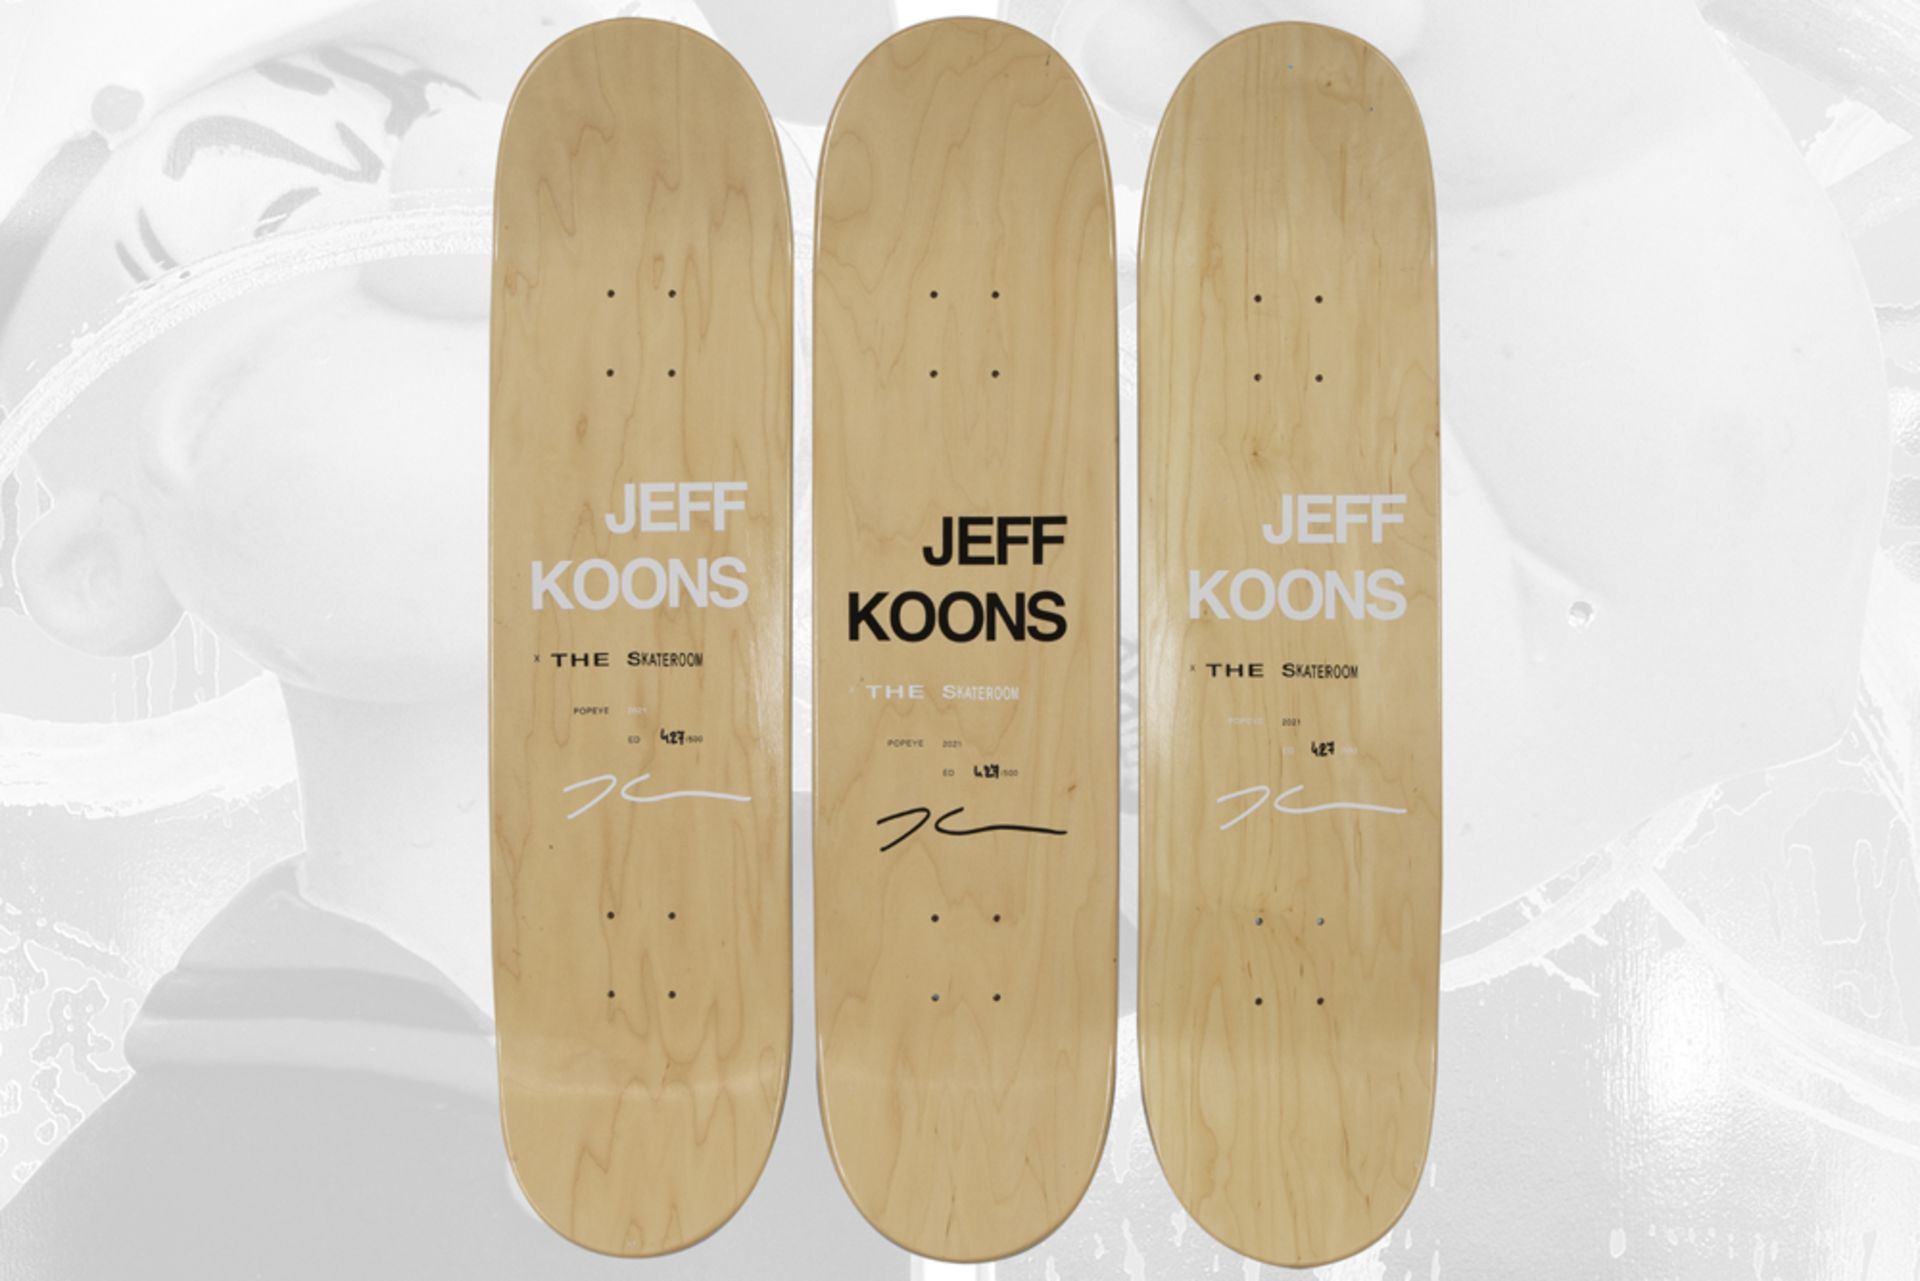 Jeff Koons plate signed "Popeye" triptych on skateboards dd 2021, an edition of 500 ex. with - Image 8 of 8